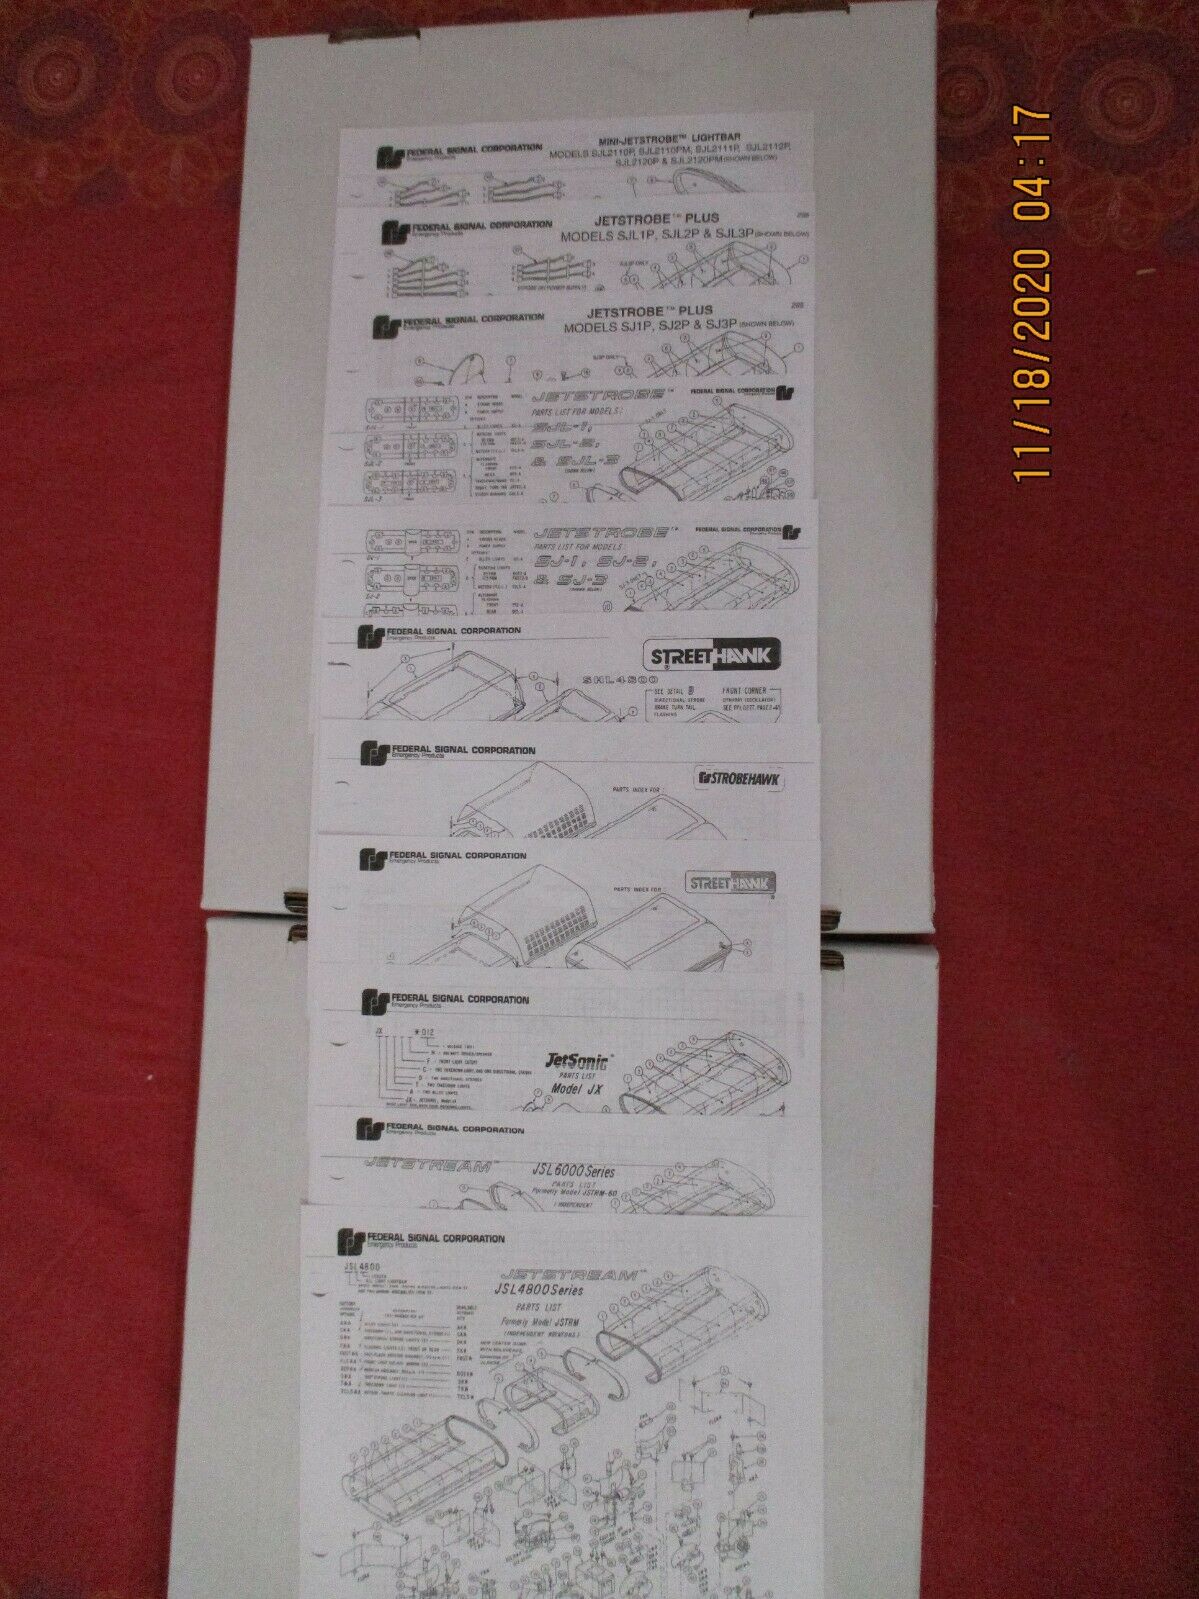 Federal Jet Series And Streethawk Light Bar Parts Illustration / Blowups 1994-96